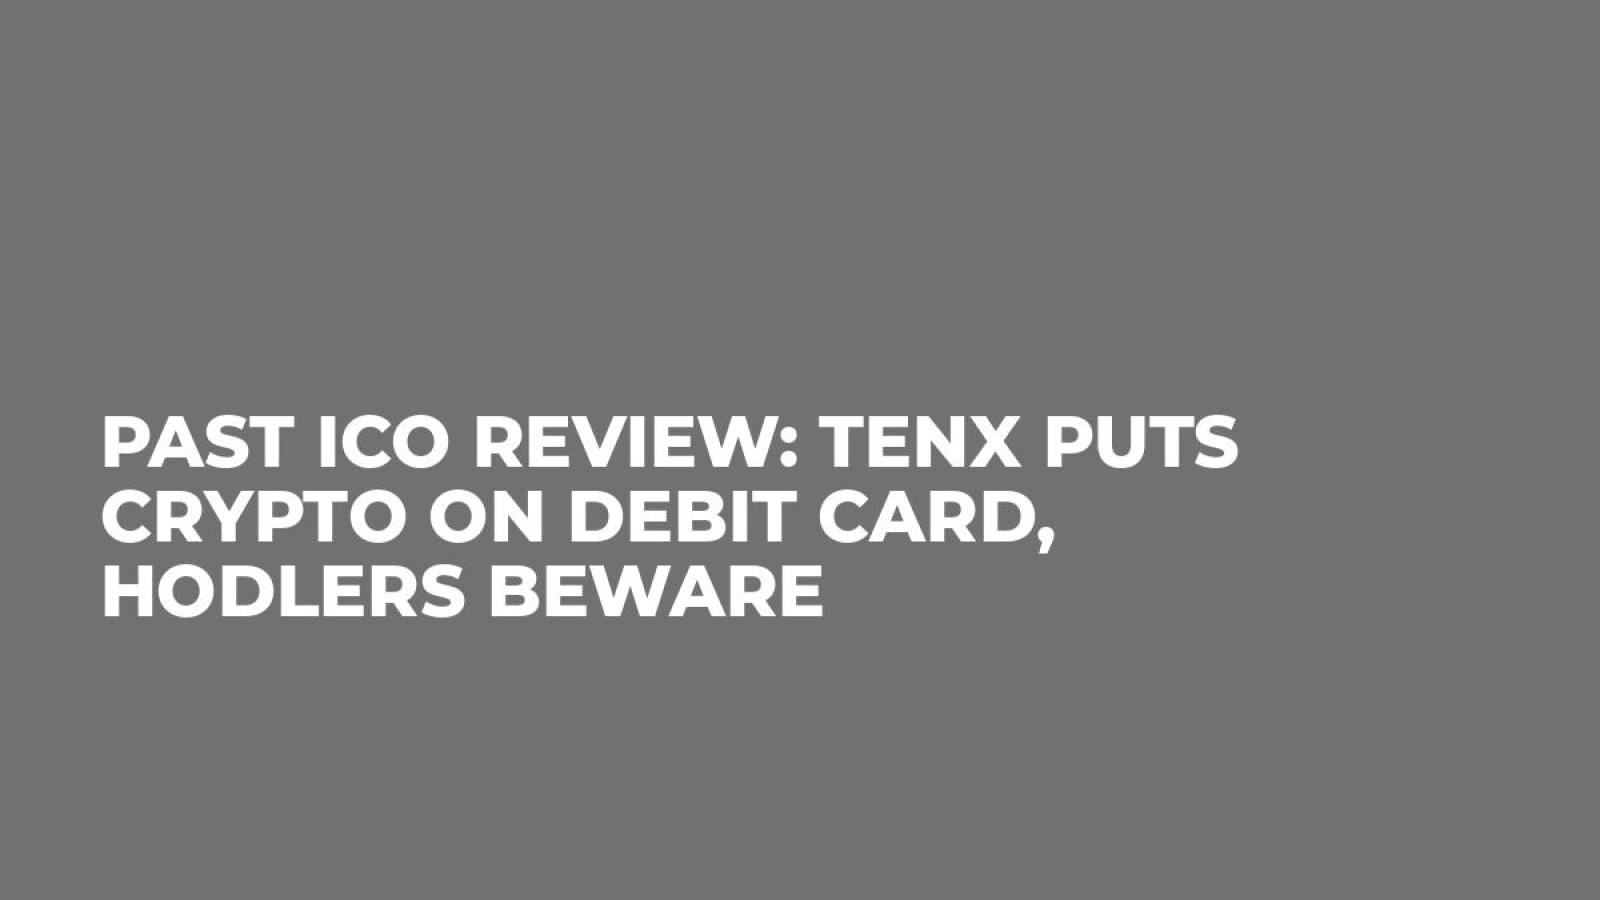 Past ICO Review: TenX Puts Crypto on Debit Card, Hodlers Beware